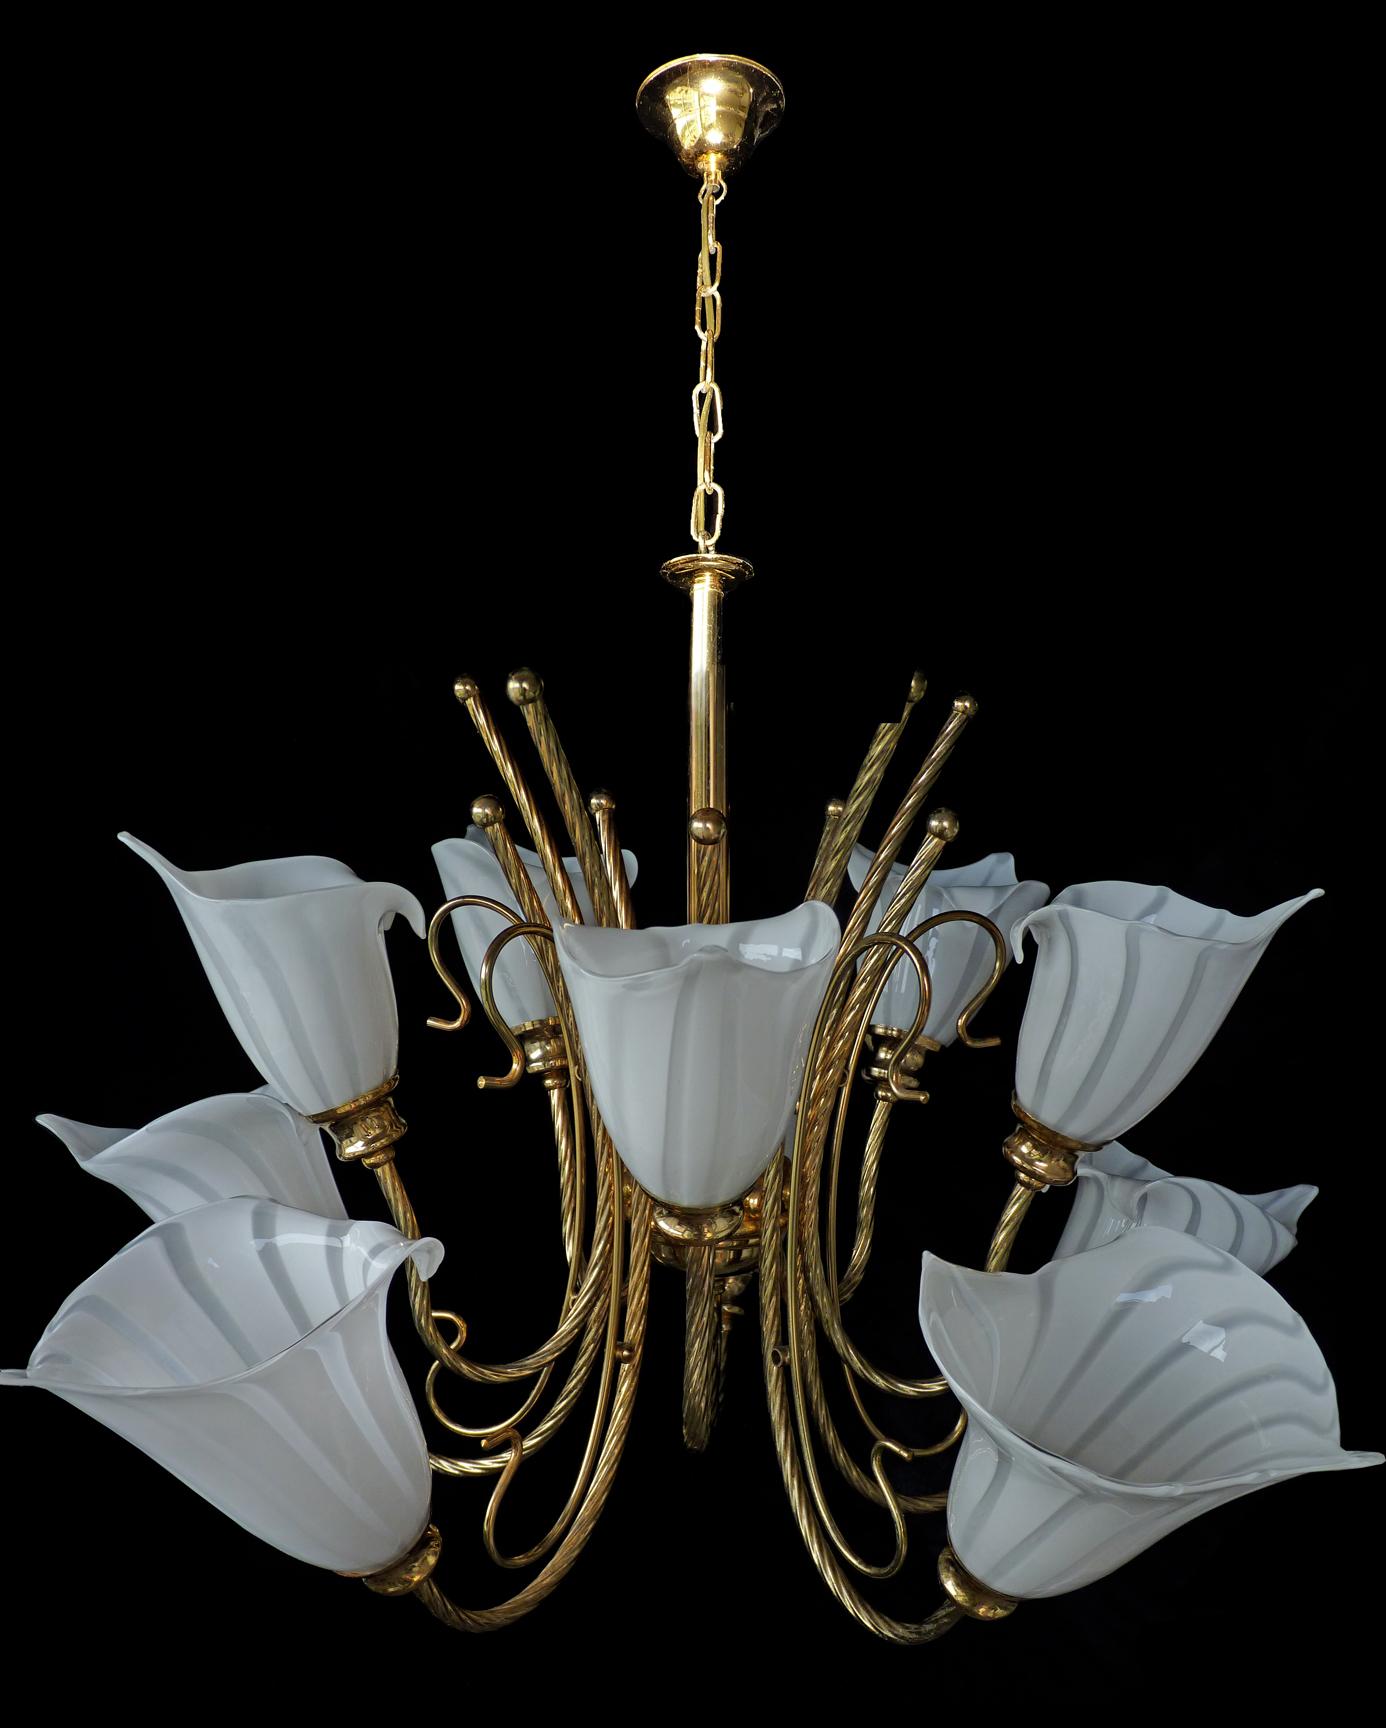 Large 10-Light Murano Calla Lily Chandelier by Franco Luce, Art Glass Gilt Brass For Sale 1